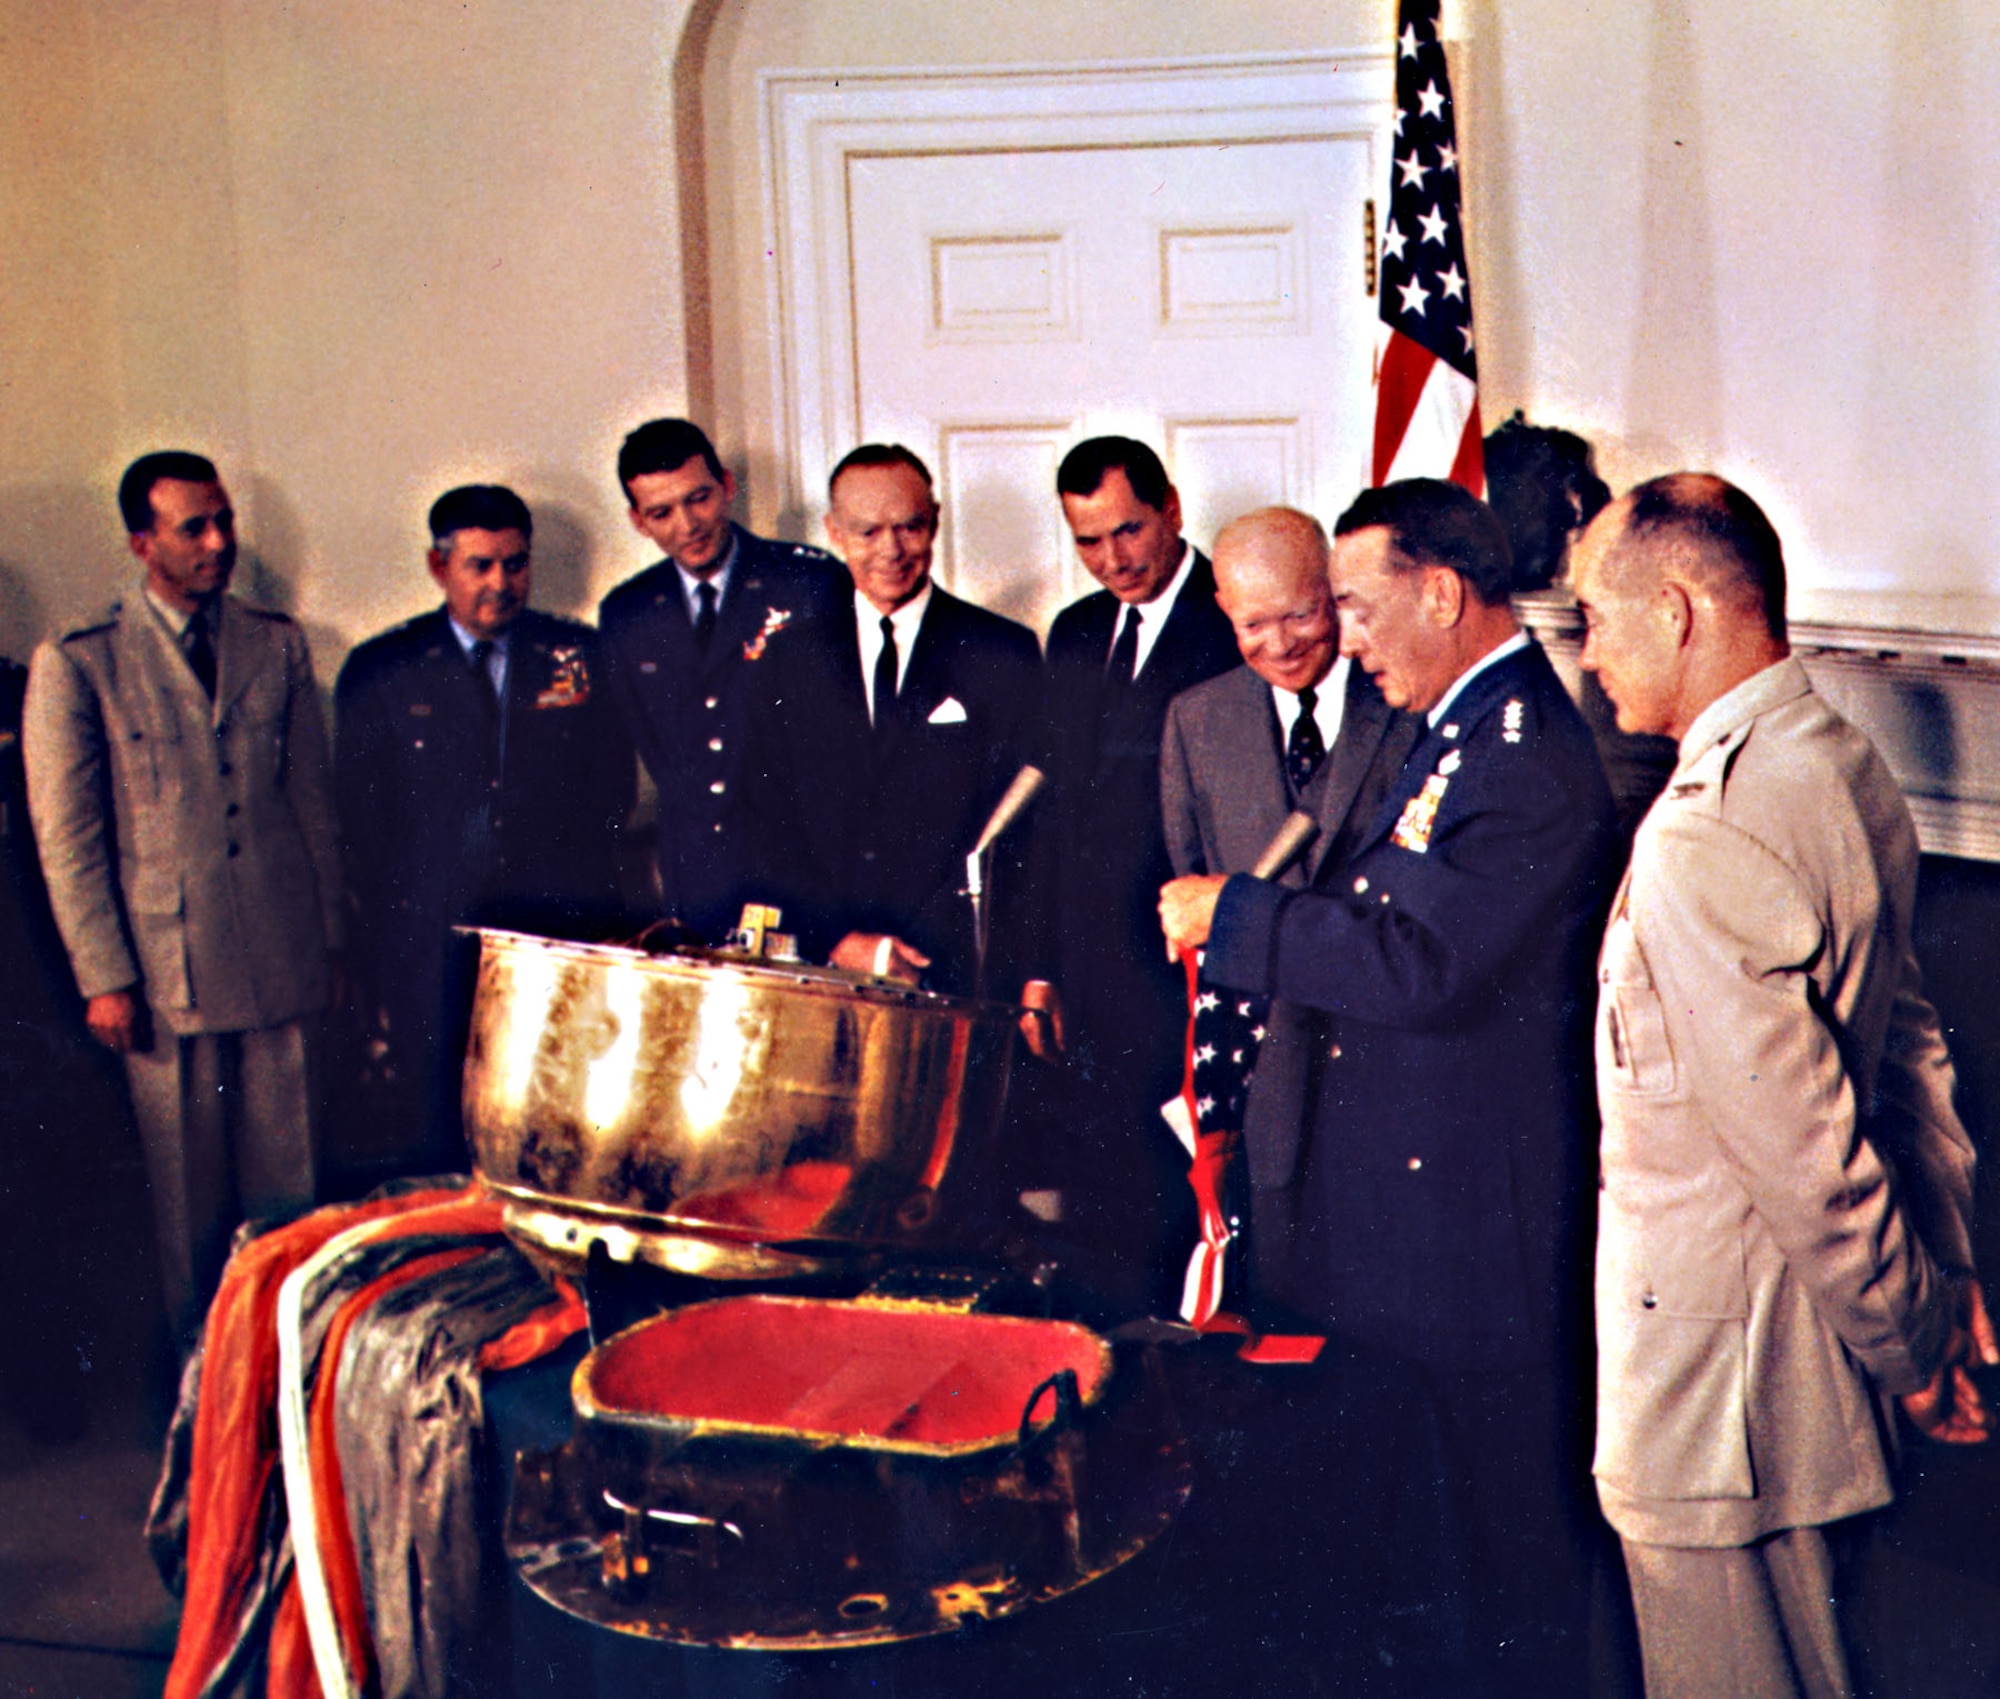 The Discoverer reconnaissance satellites heralded an era of powerful USAF space capabilities. In this photo, Gen. T.D. White presents an American flag flown on Discoverer XIII to President Dwight Eisenhower. (U.S. Air Force photo)